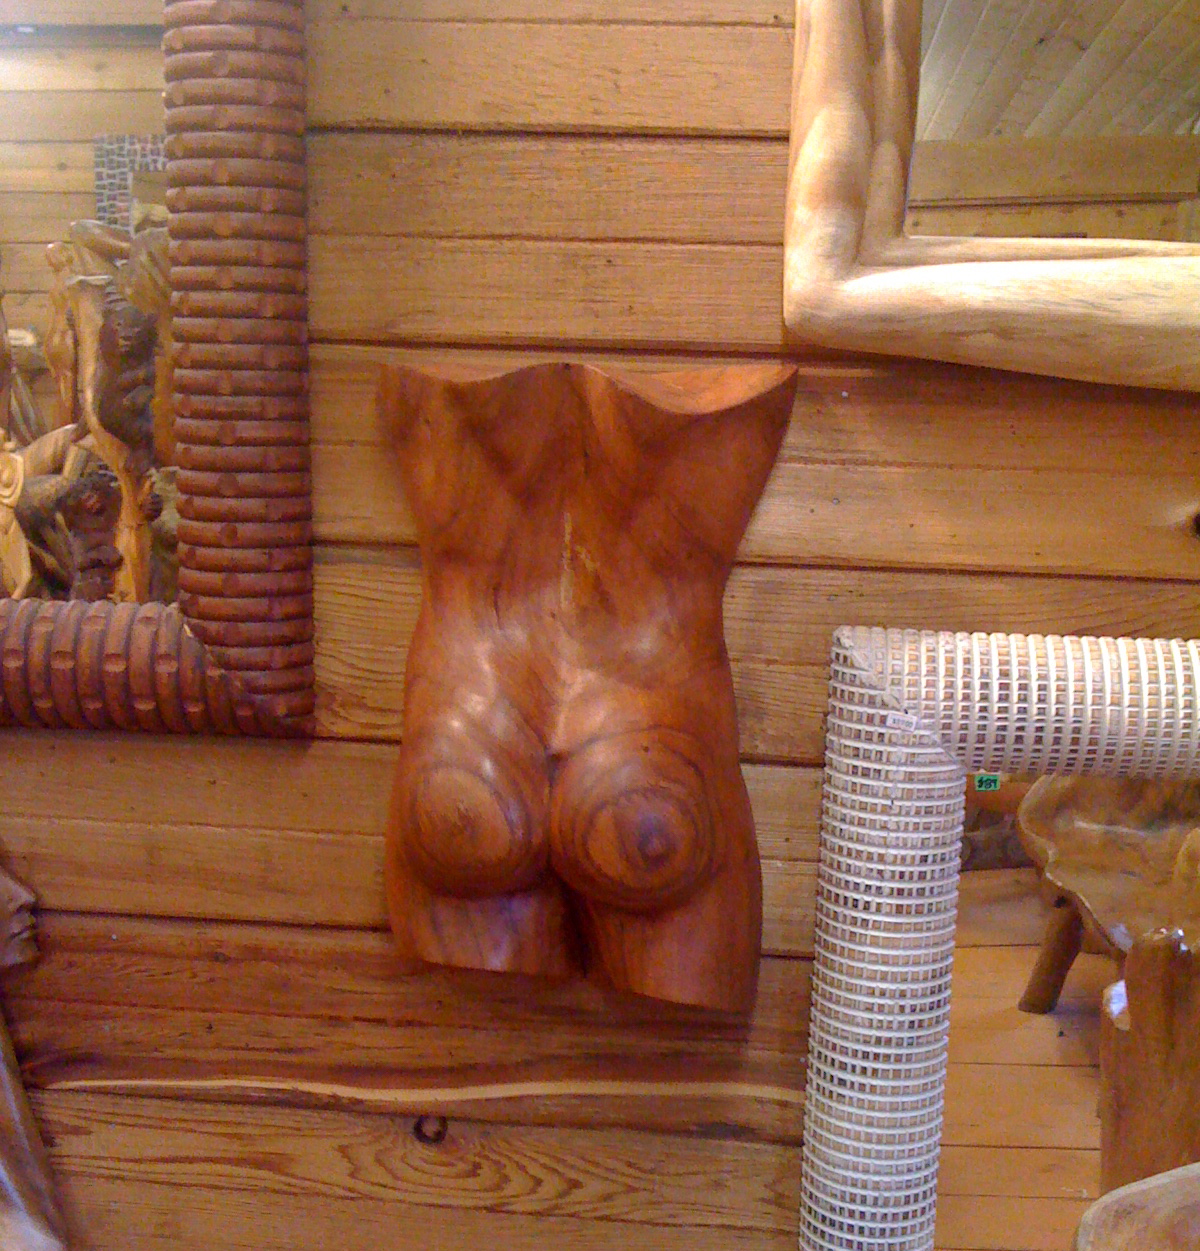 More Wooden Tits Than You Could Shake A Stick At